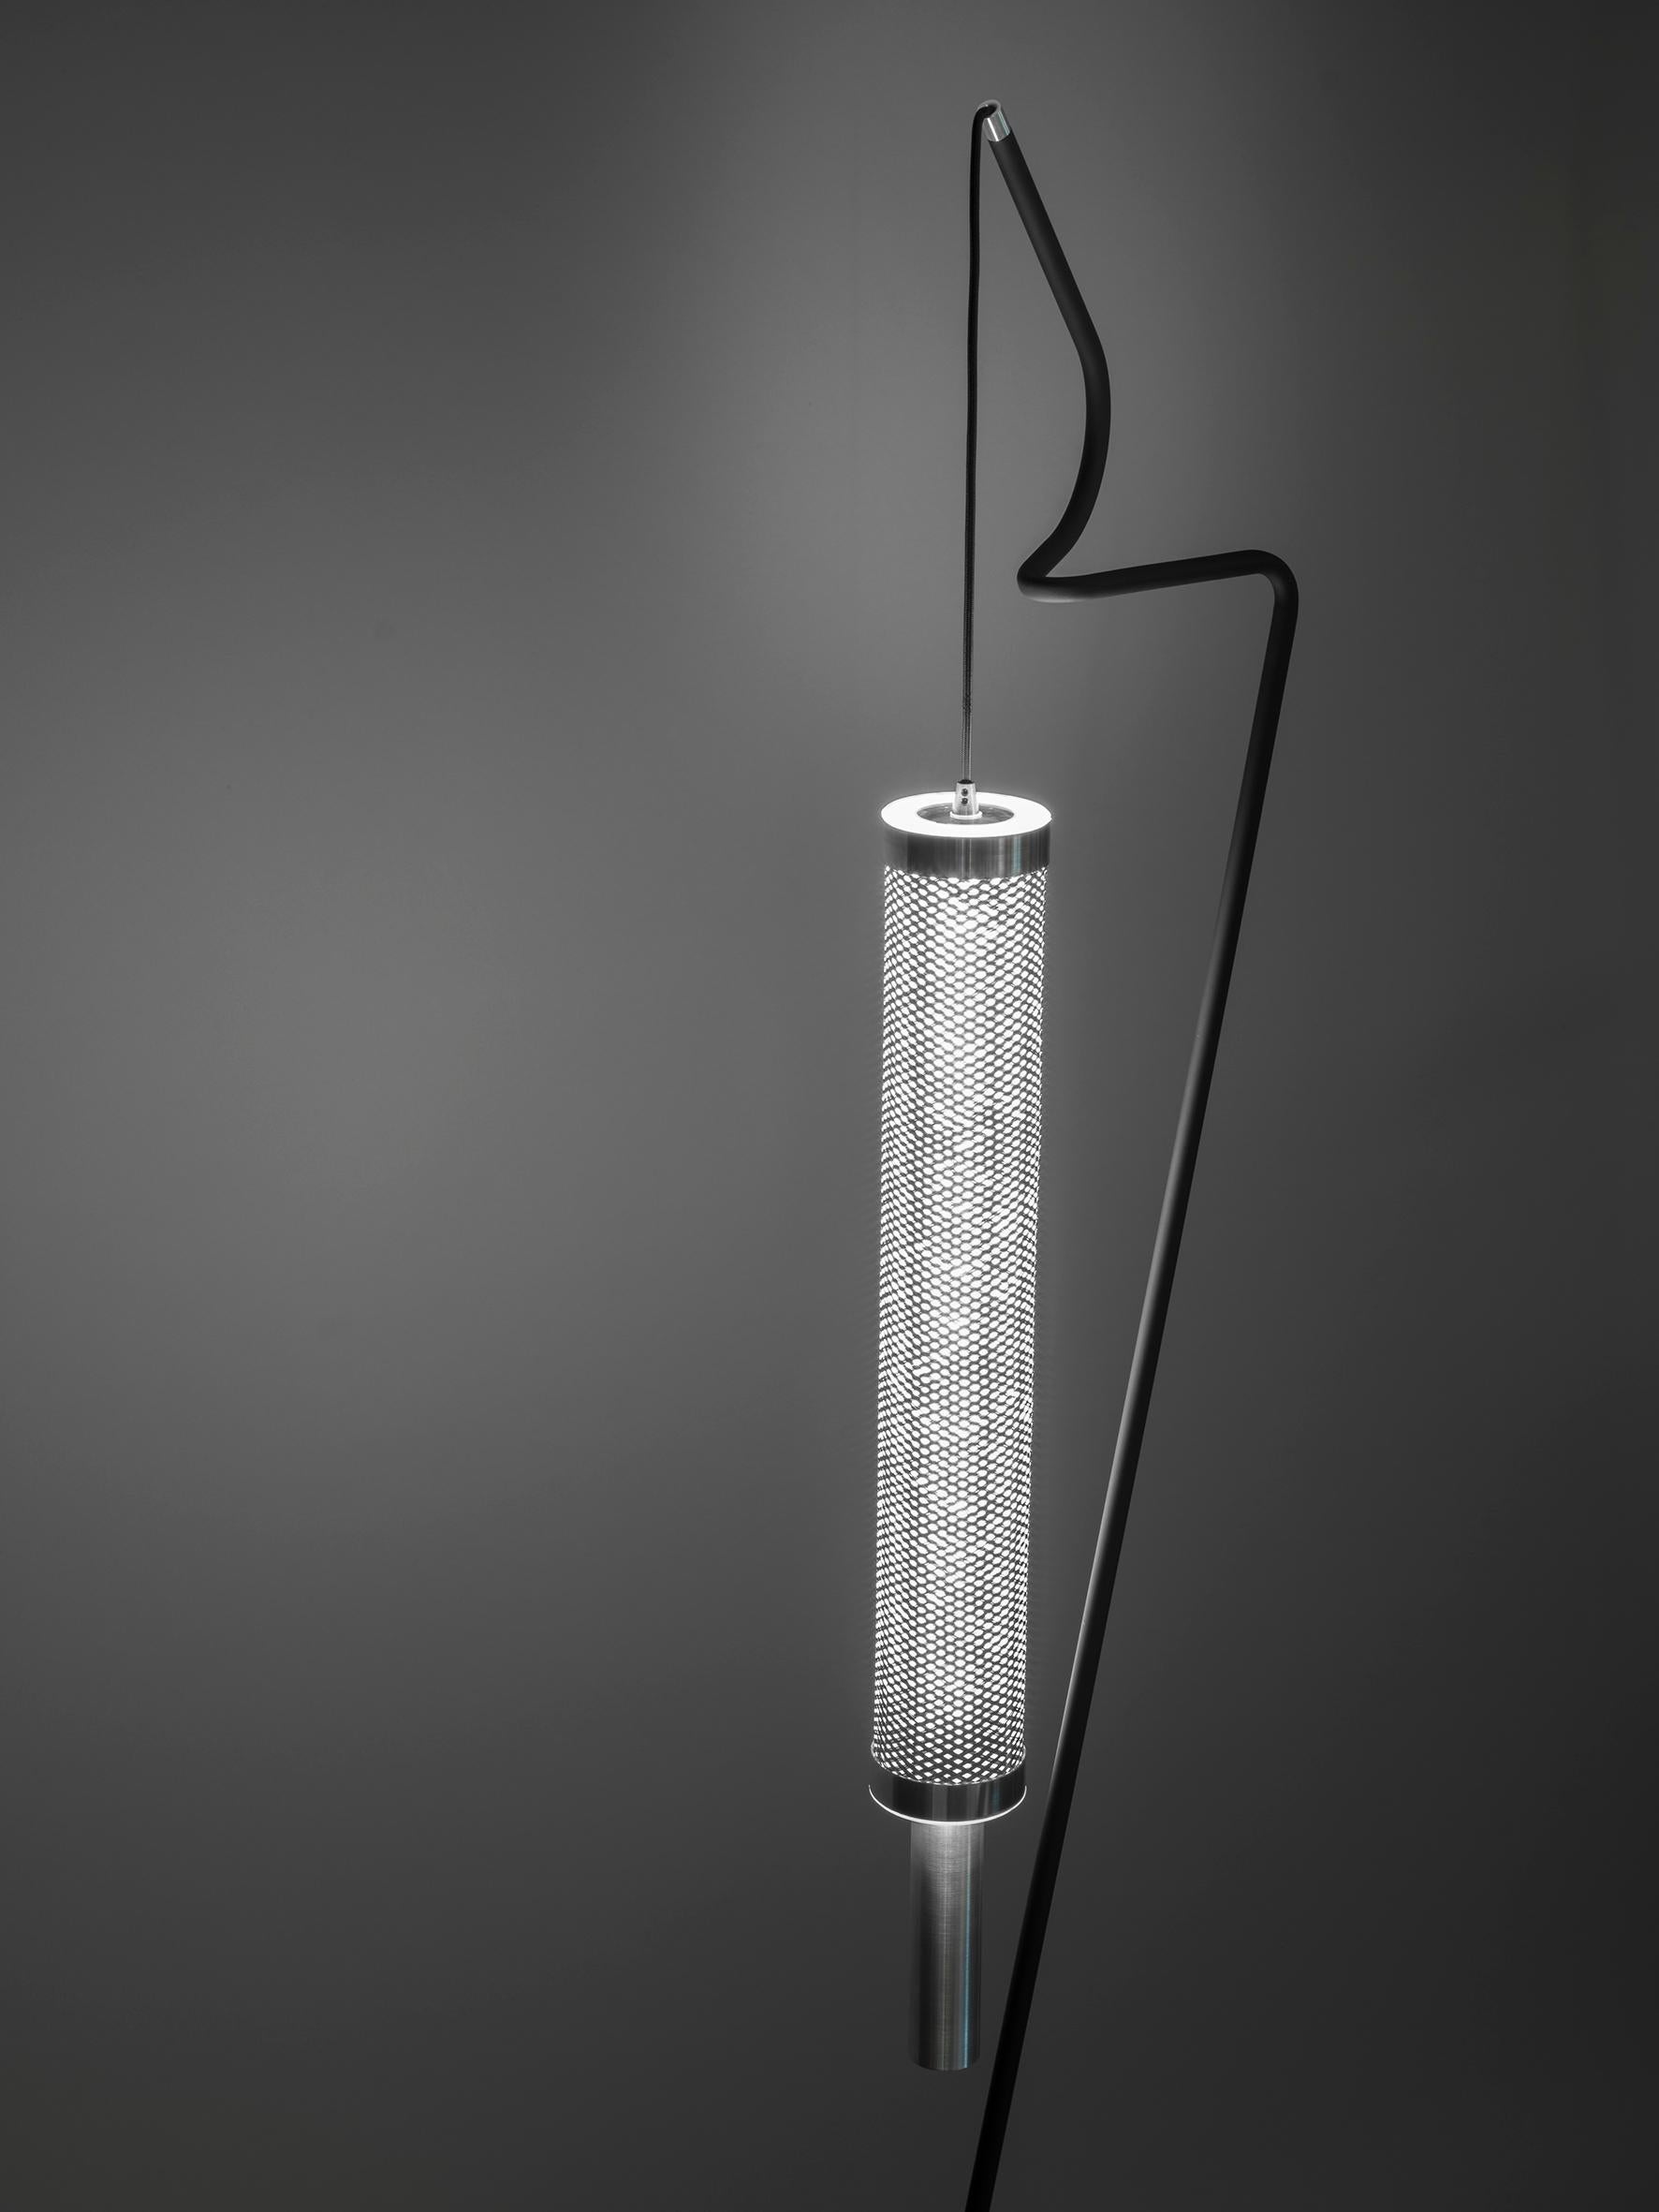 Please note that VAT is not included in the price.

Floor lamp with double switching. Two different lights can be obtained: widespread through the shade or indirect through the upper diameter of the lamp shade. With its supporting rod, lampshade